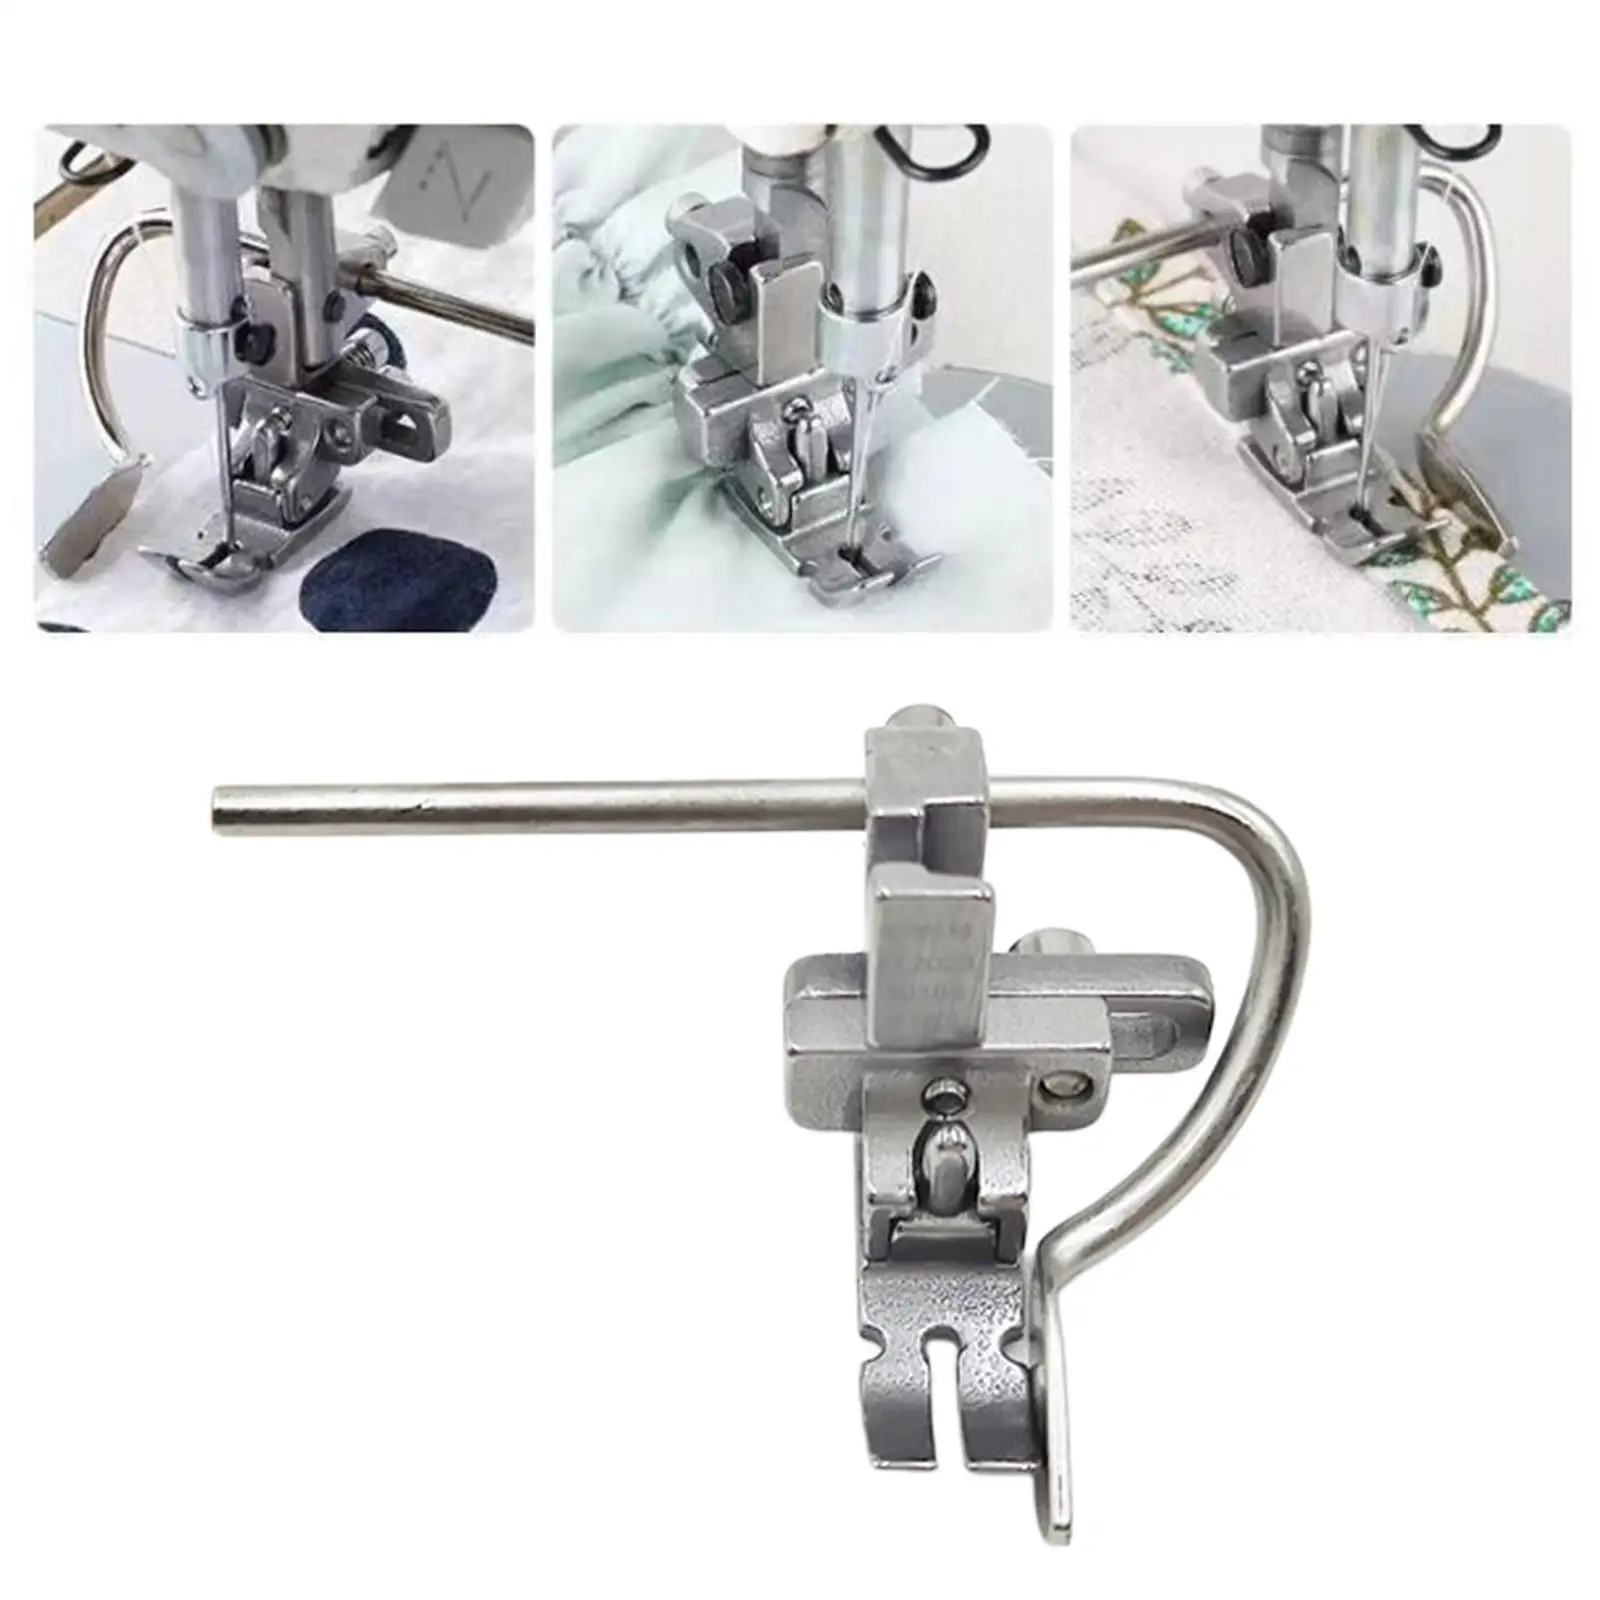 Presser Foot for Sewing Machine Straight Stitch Presser Foot for Pillow Cover Bag Sewing Cording DIY Arts Crafts Clothes